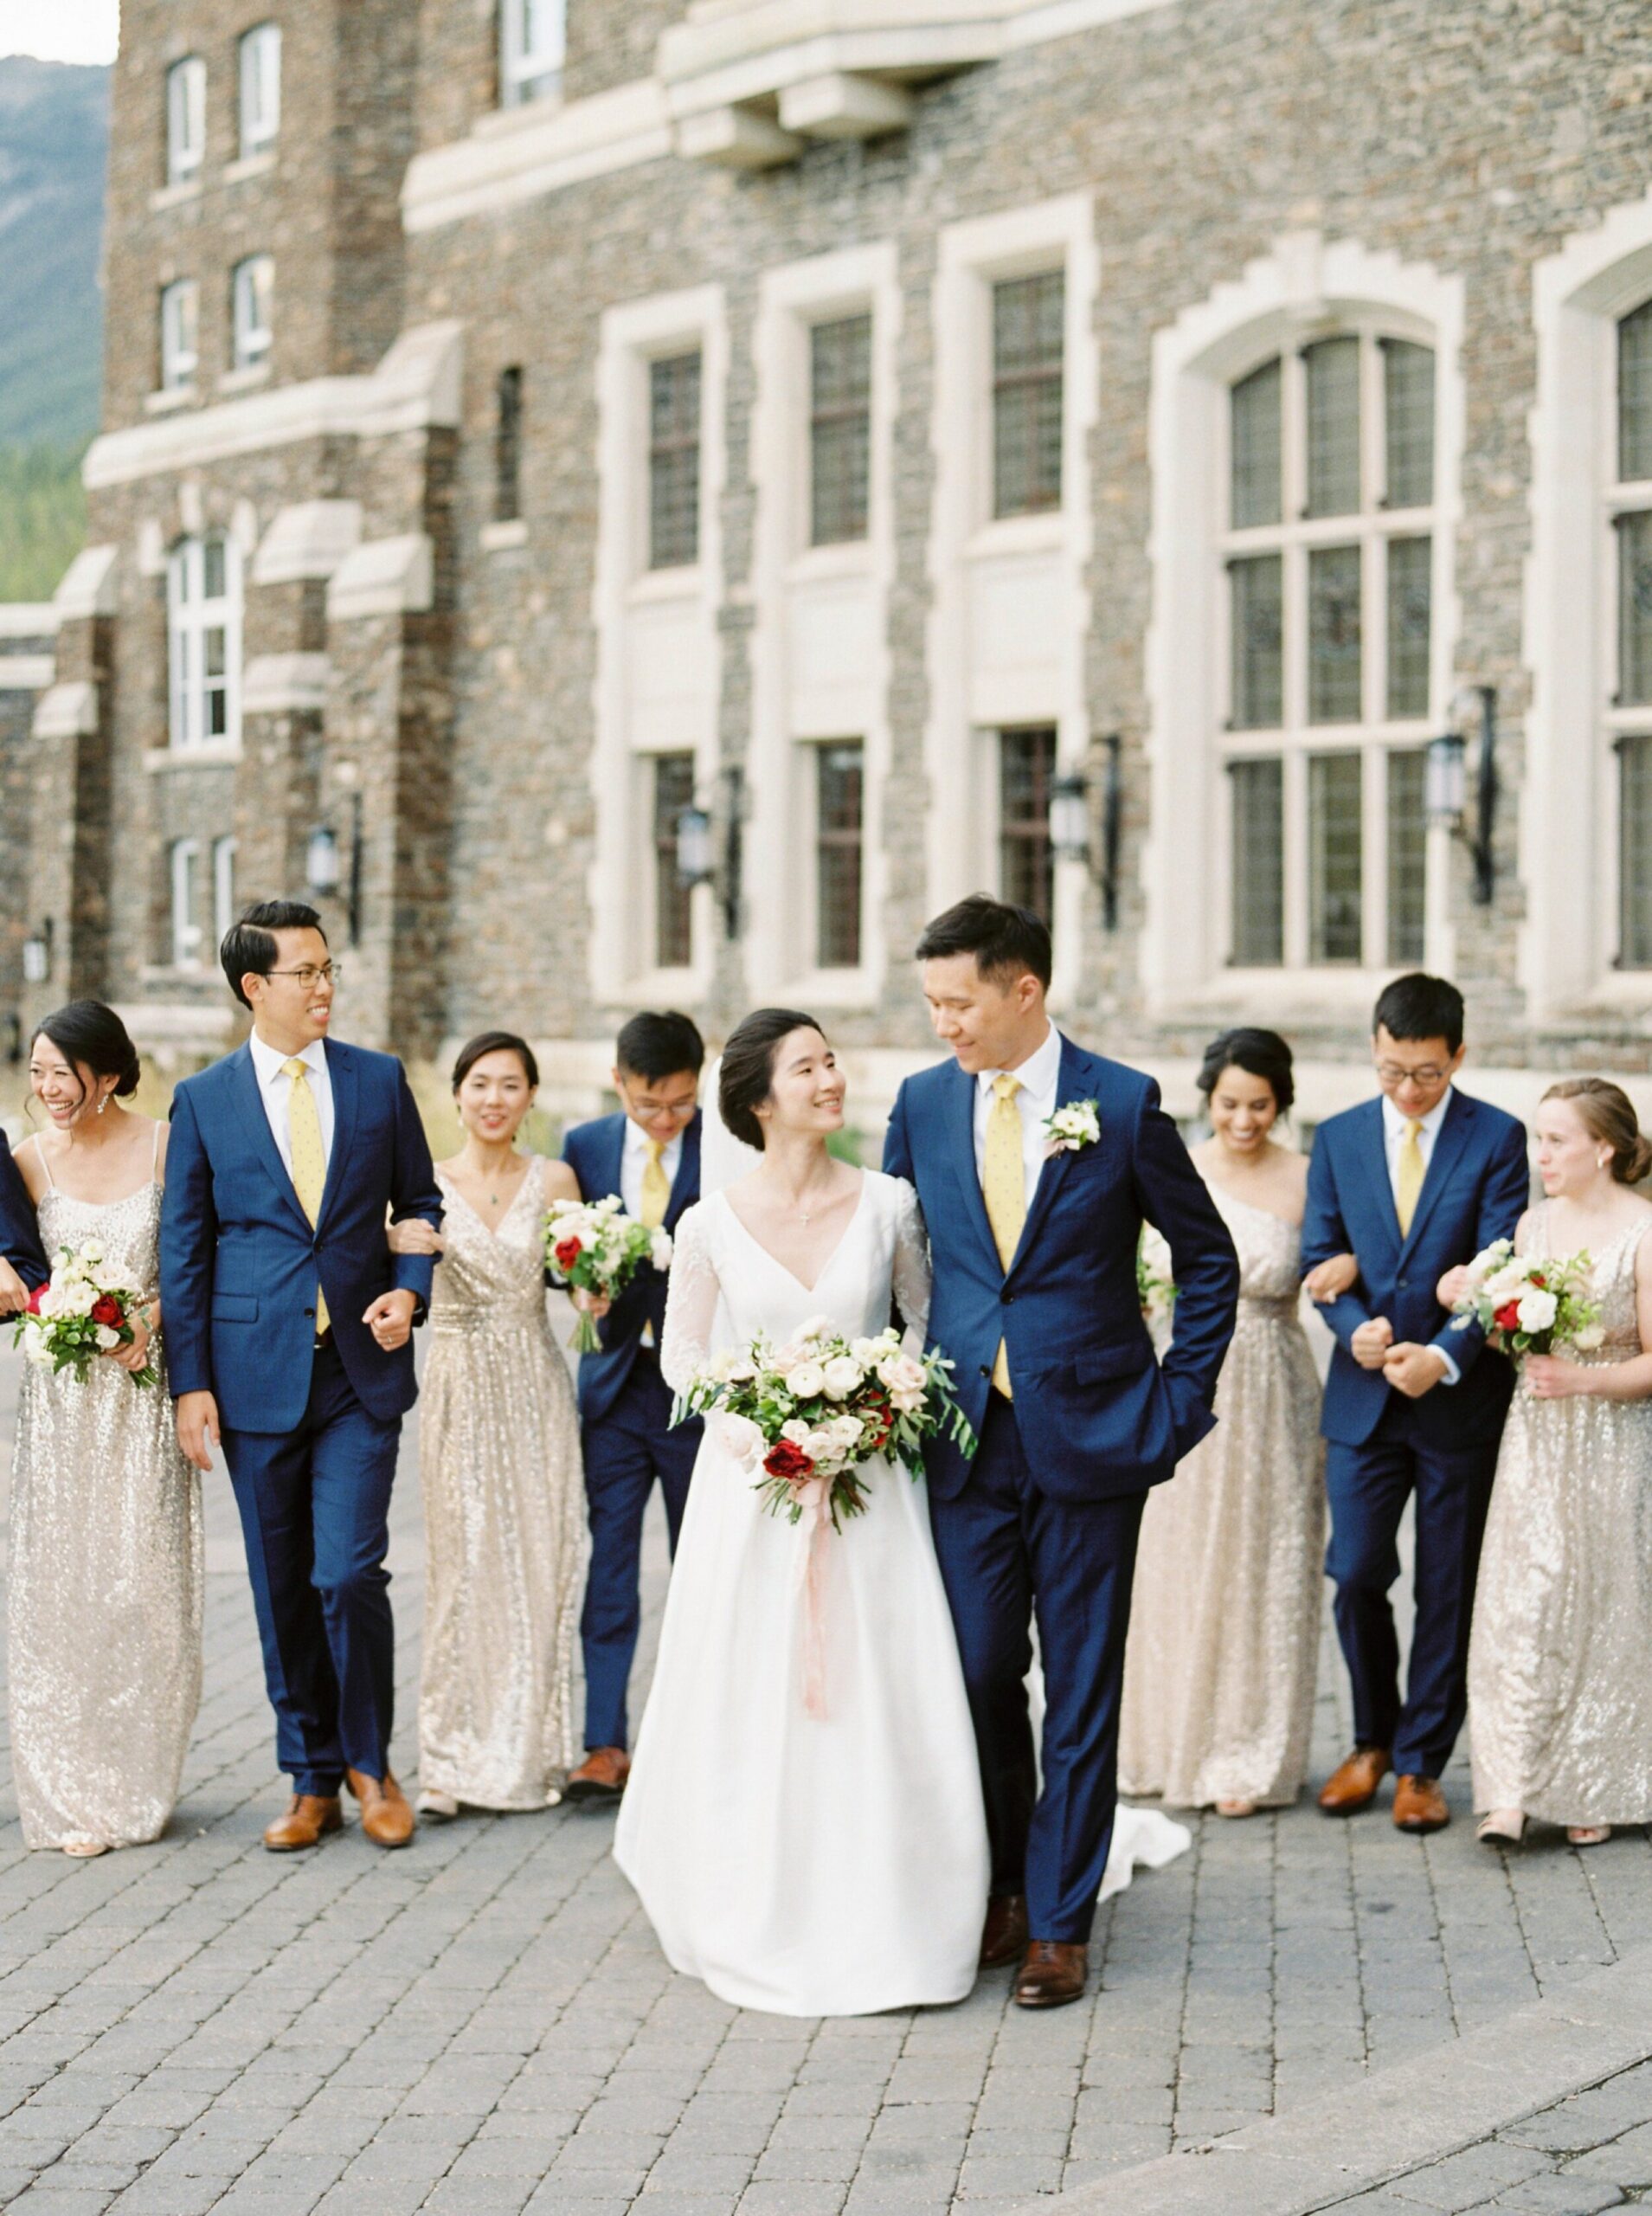  bridesmaids in gold maxi dress | Groomsmesn in Navy blue suits and yellow ties | Fairmont Banff Springs hotel wedding photographers | fine art film photography | portra 400 